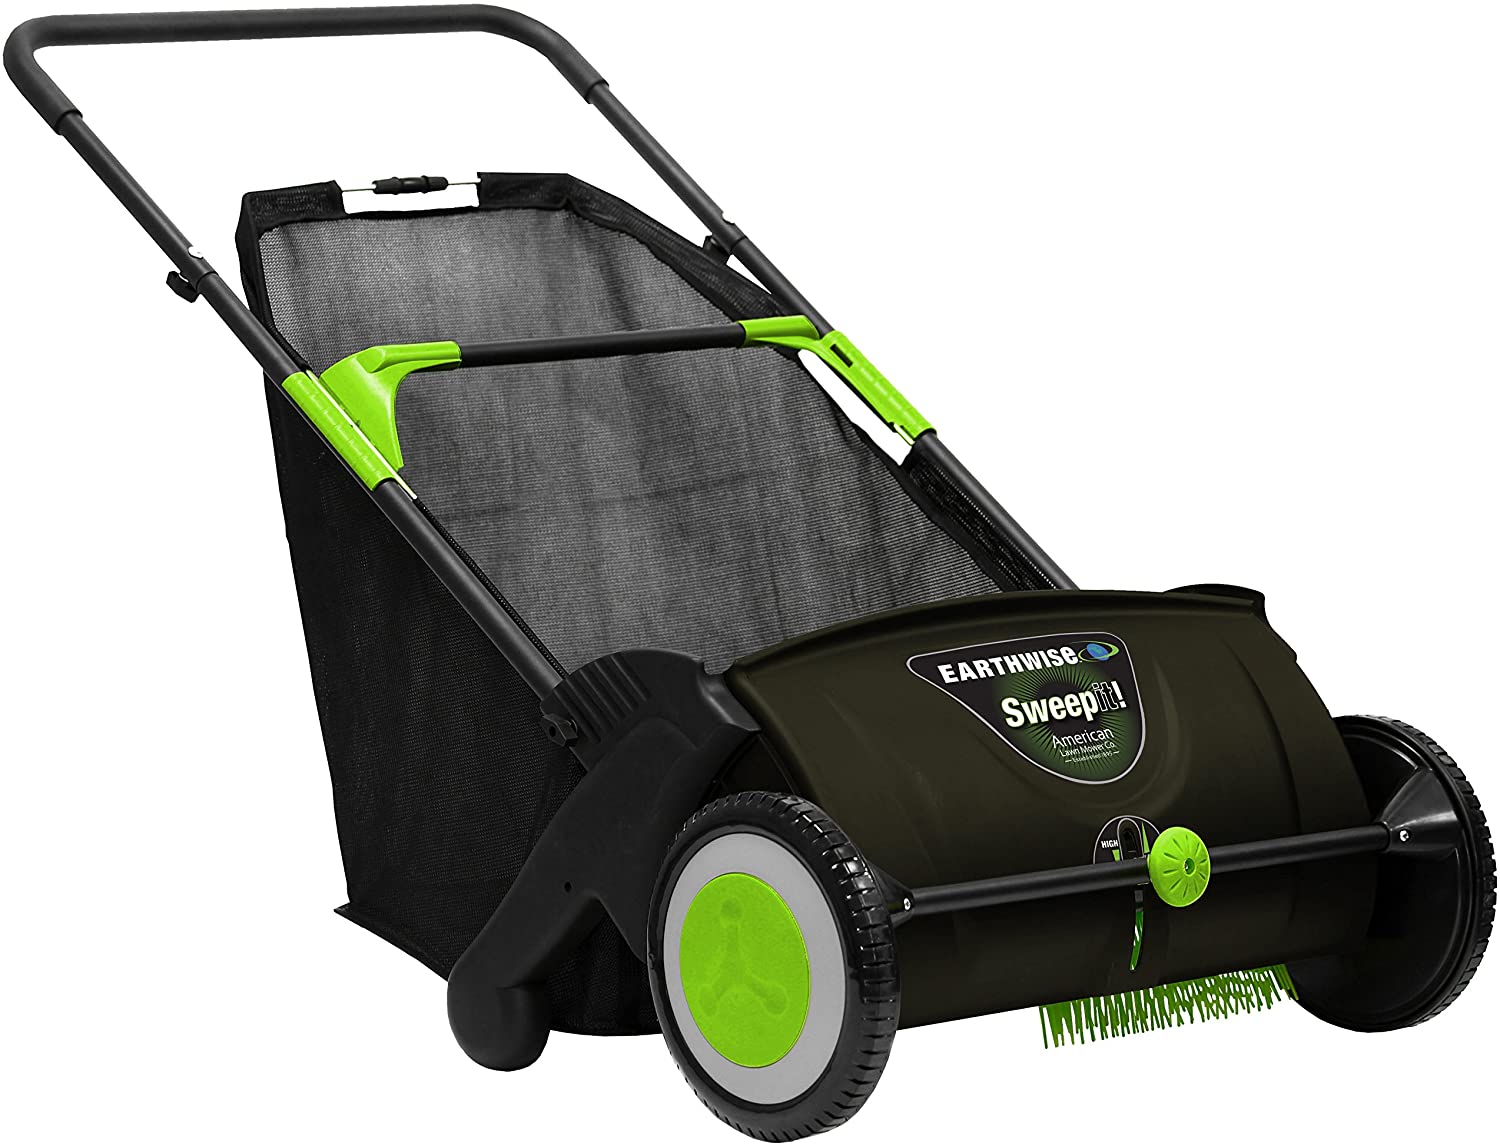 Earthwise LSW70021 Lawn Sweeper